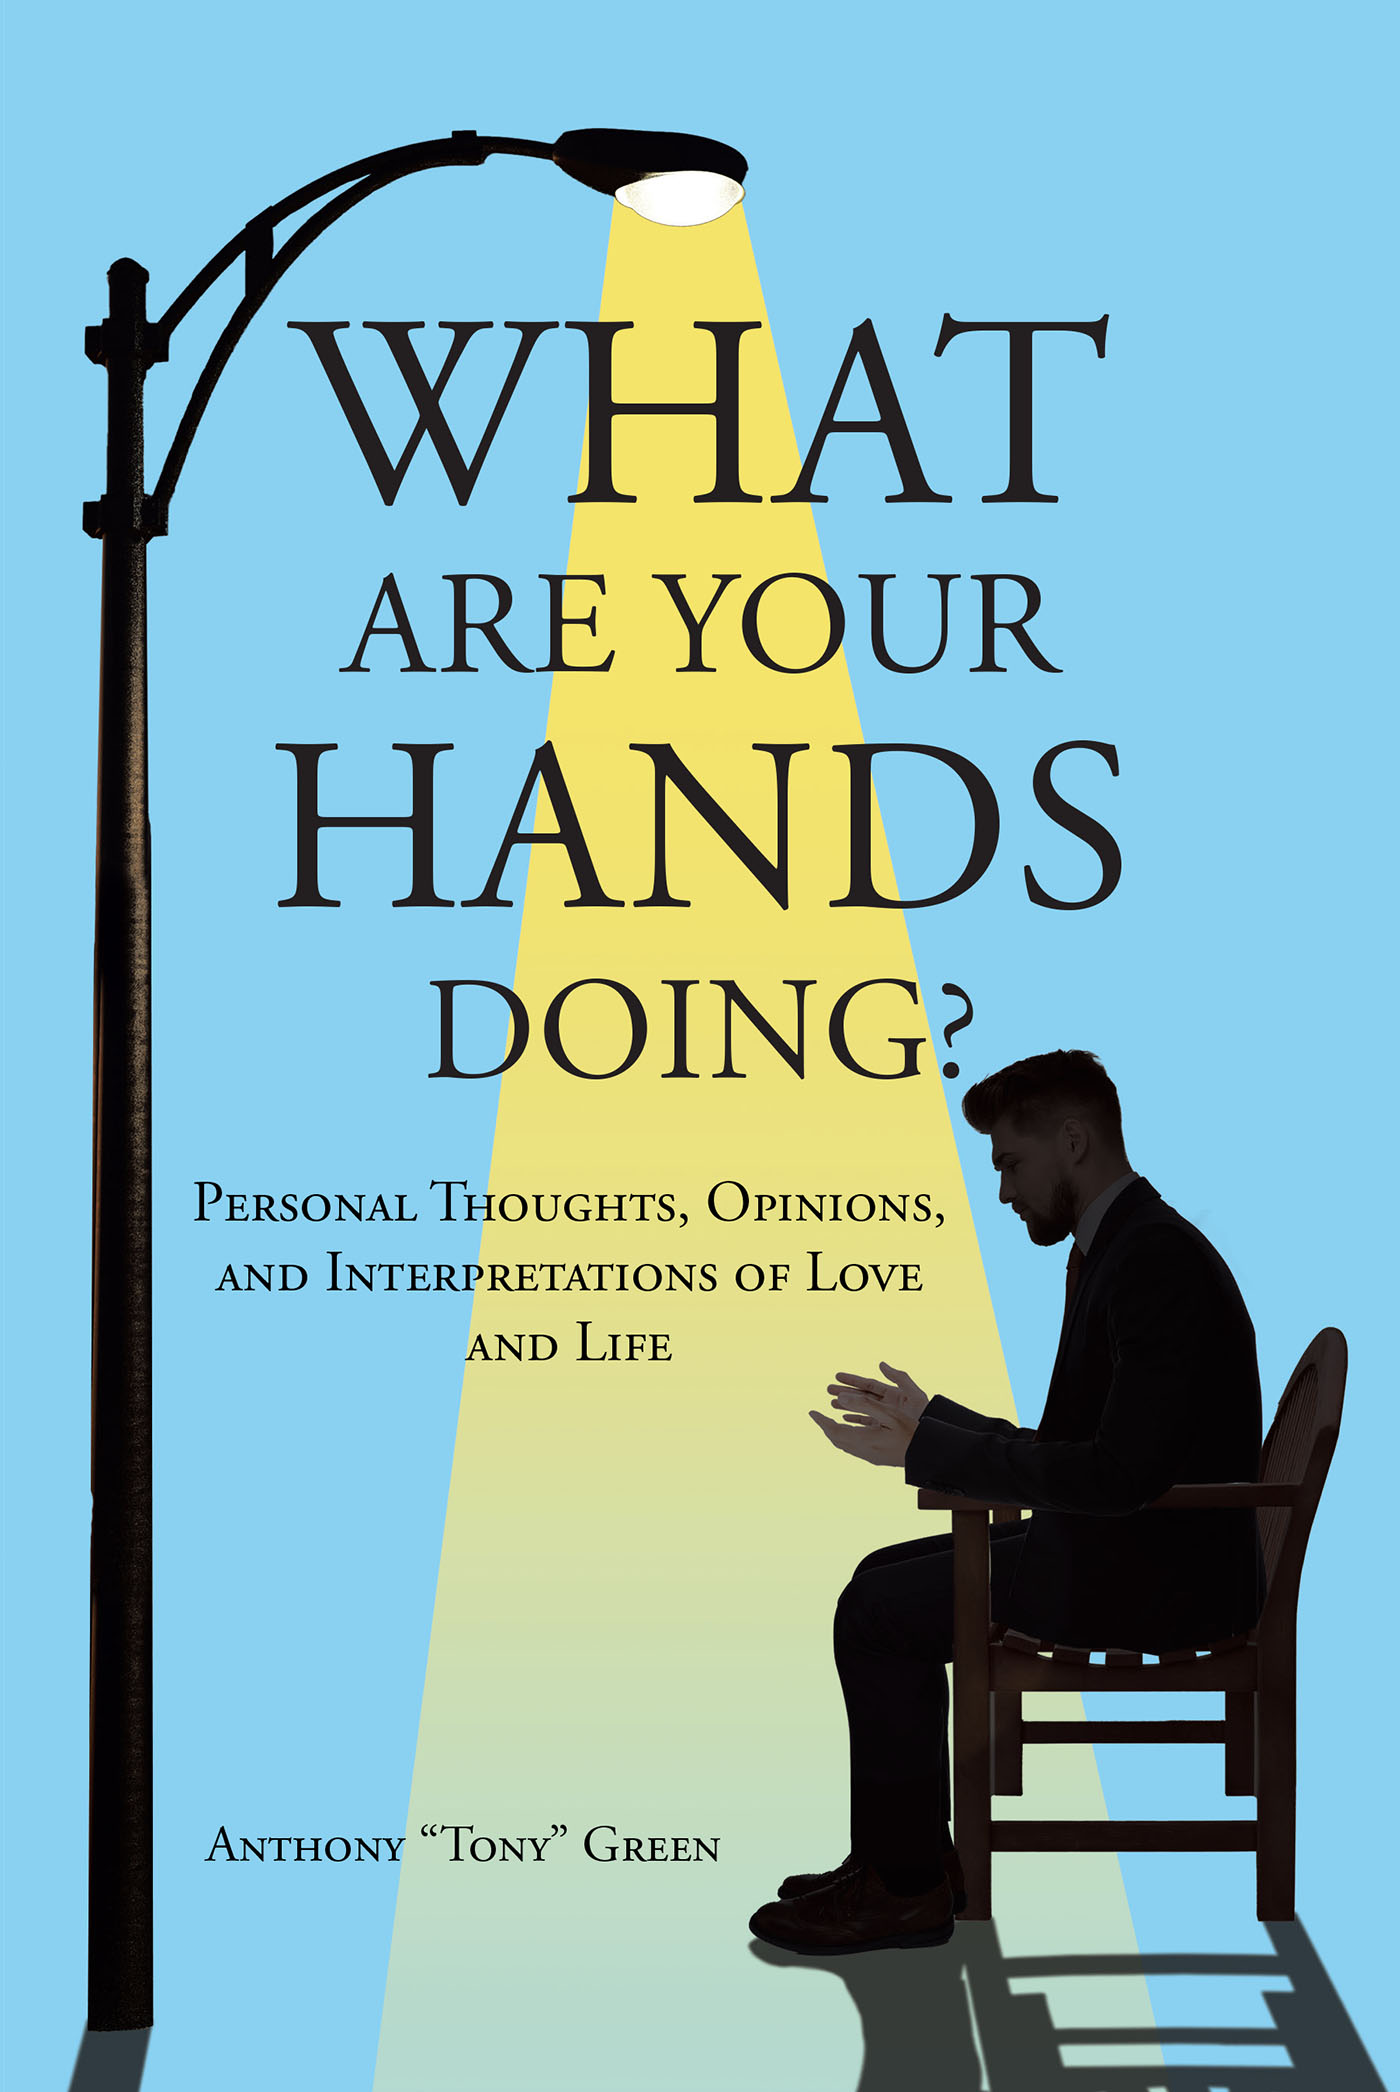 Anthony "Tony" Green’s Newly Released "What Are Your Hands Doing?" Is a Thoughtful Discussion of the Importance of What We Task Our Hands with